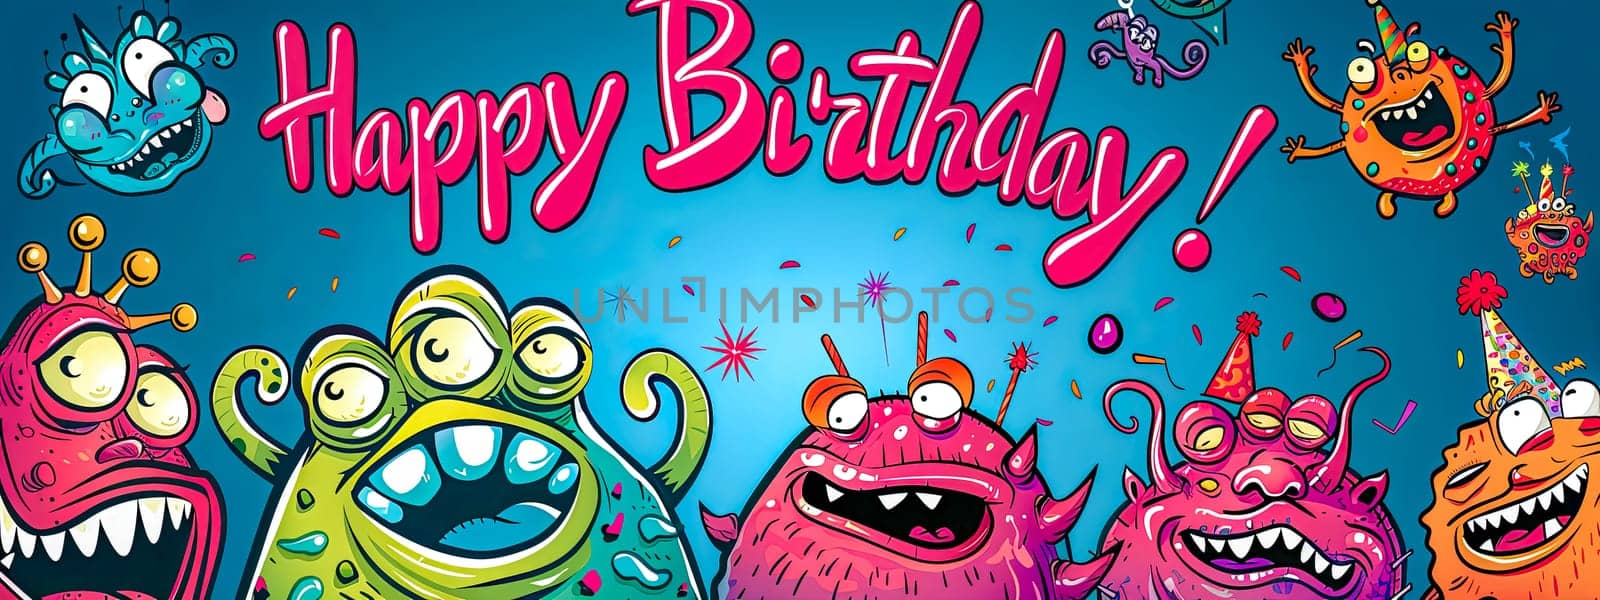 Colorful monster birthday party banner by Edophoto